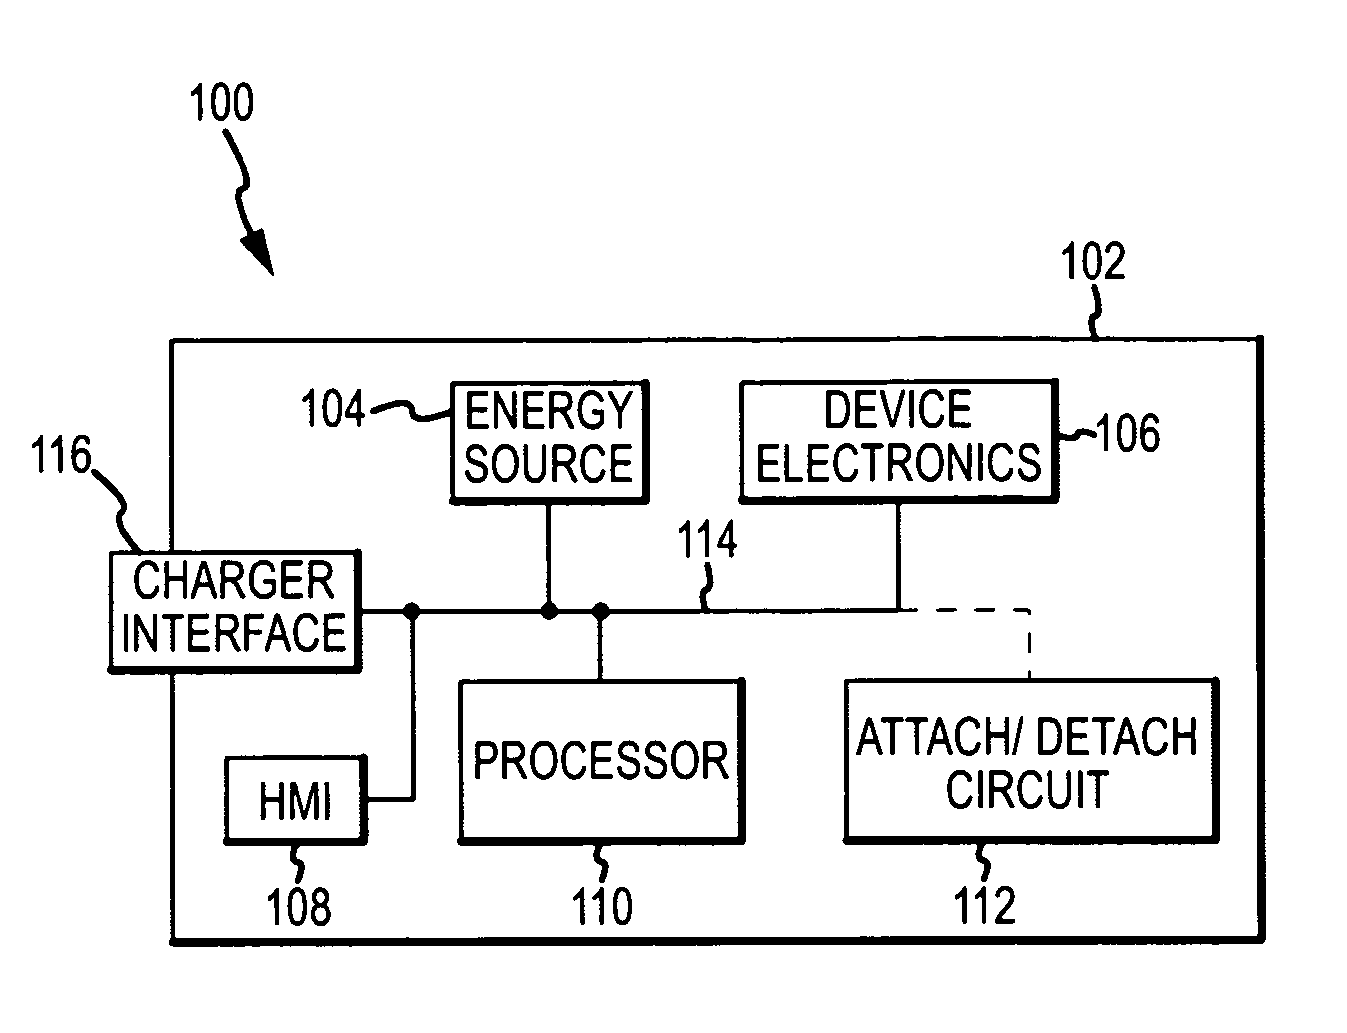 Energy source isolation and protection circuit for an electronic device